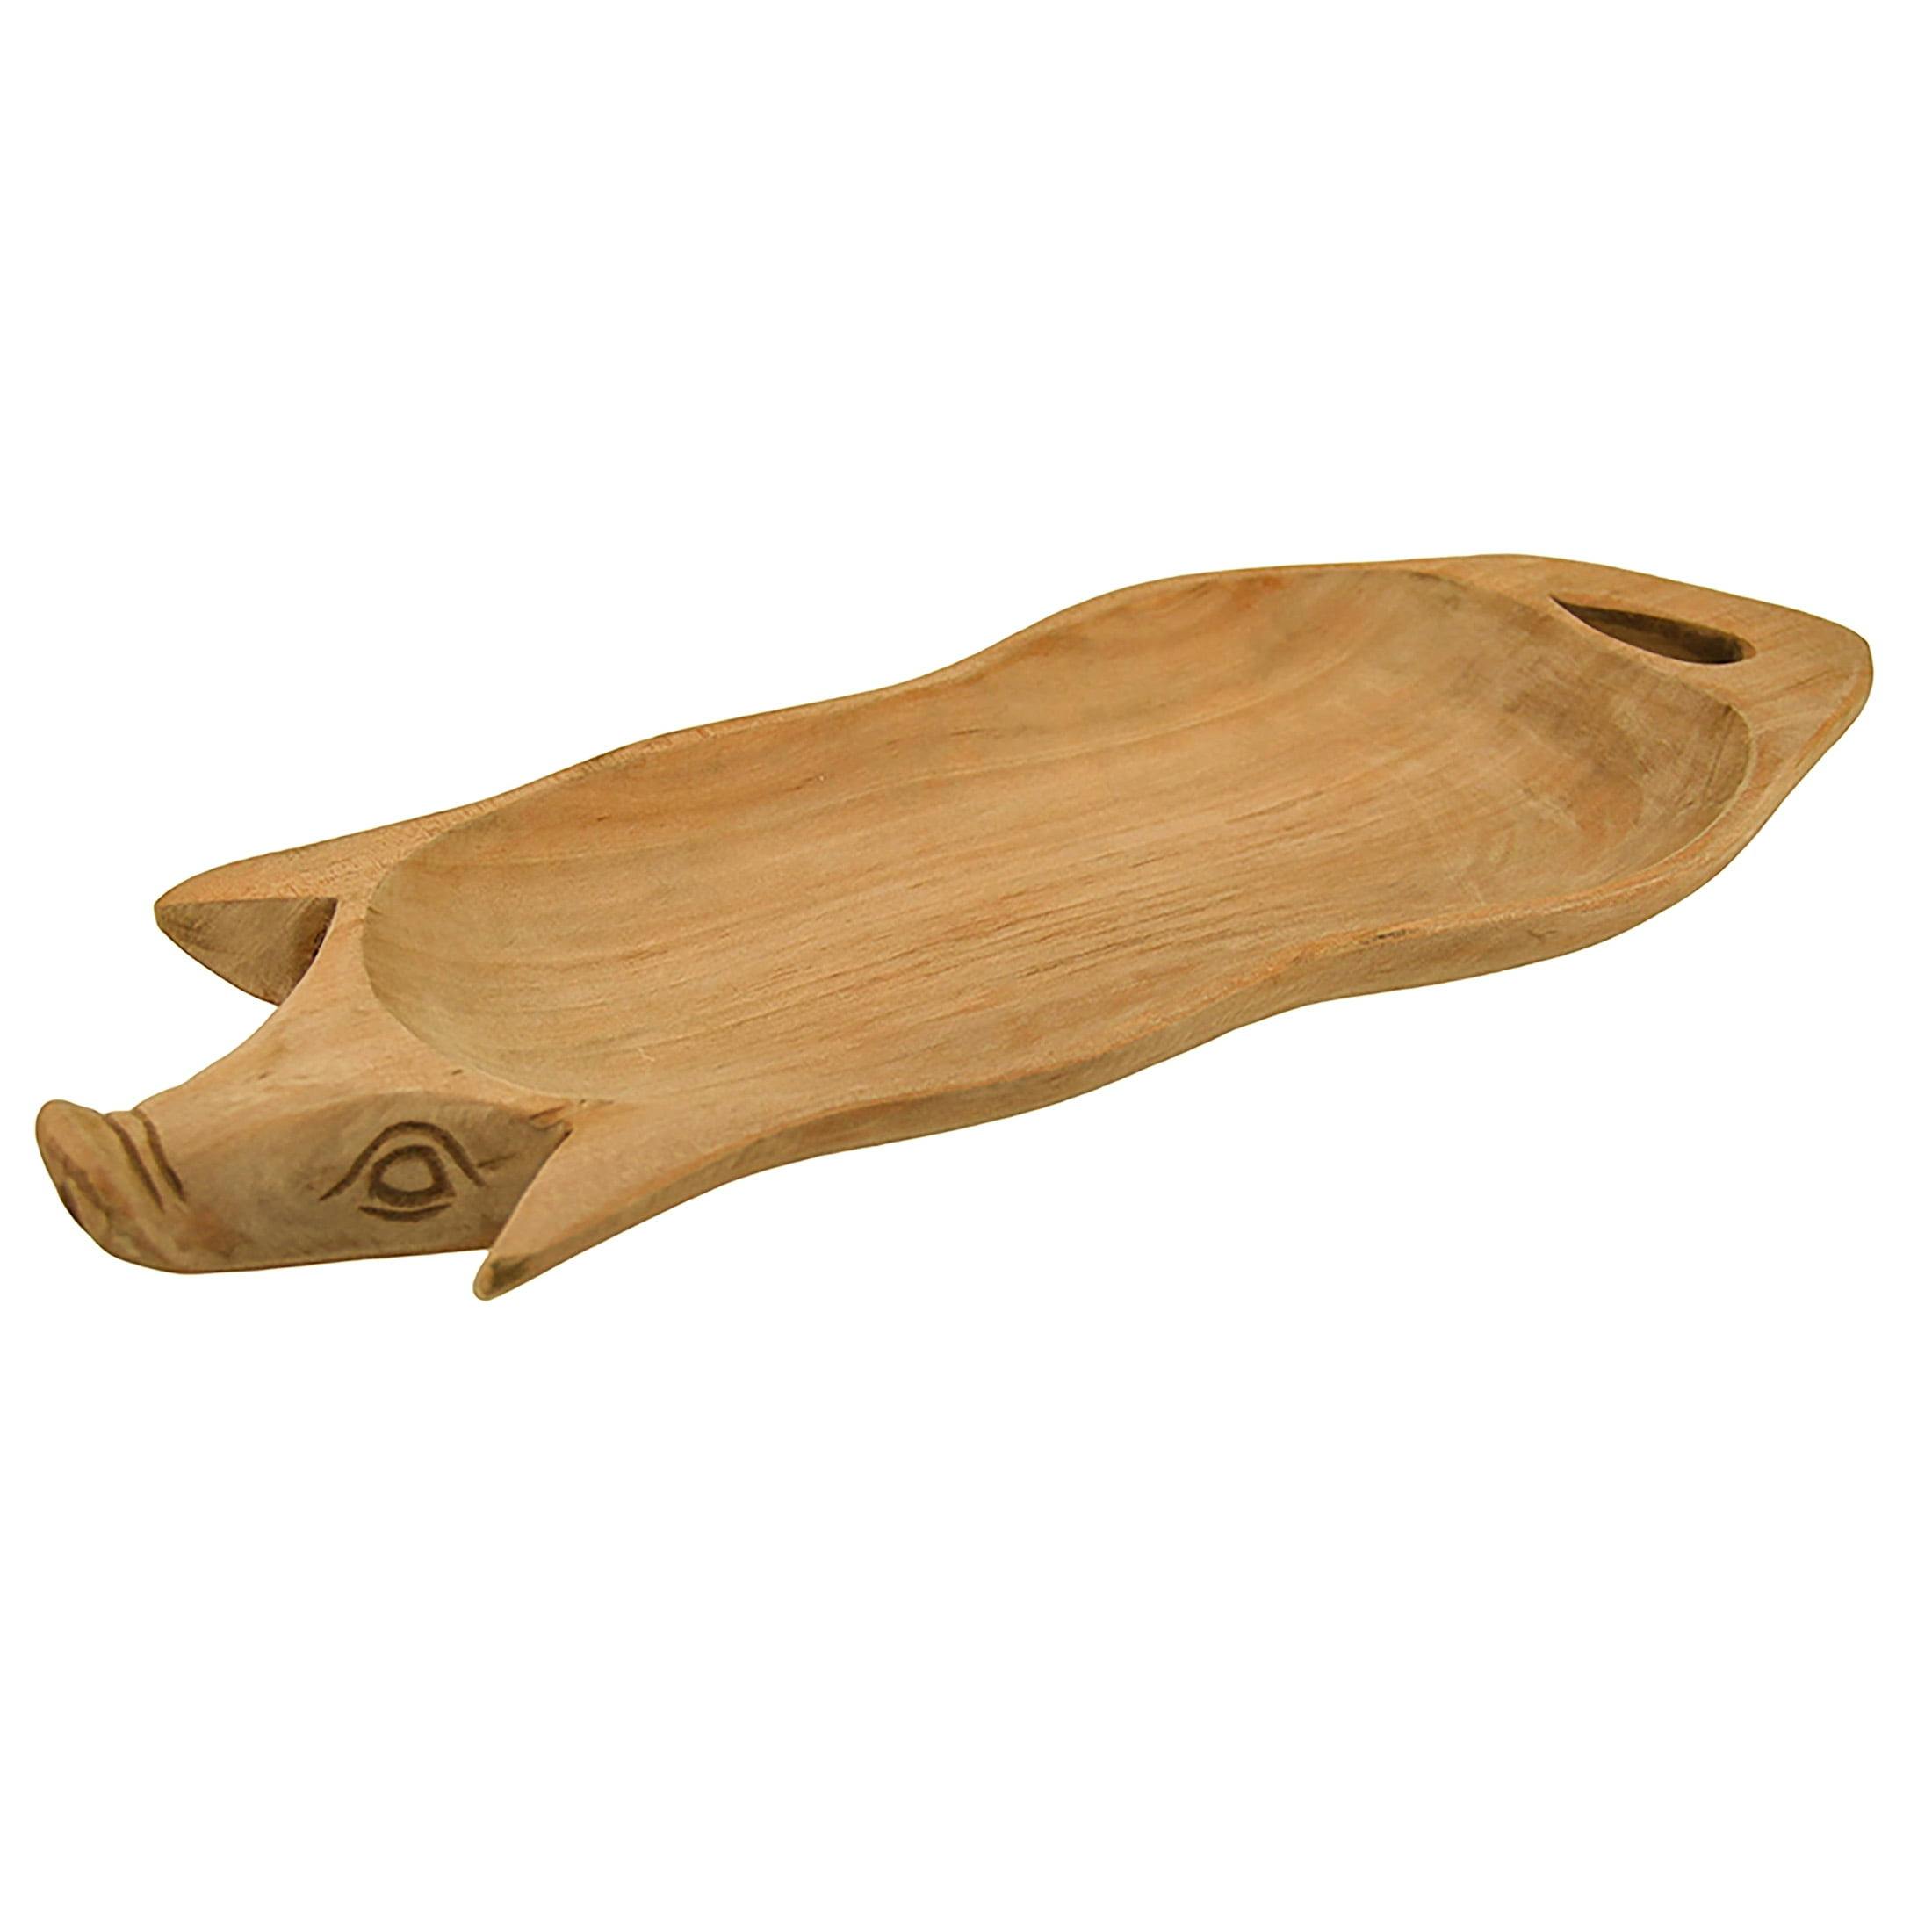 Rustic Hand-Carved Pig-Shaped Natural Wood Serving Tray 14.75"